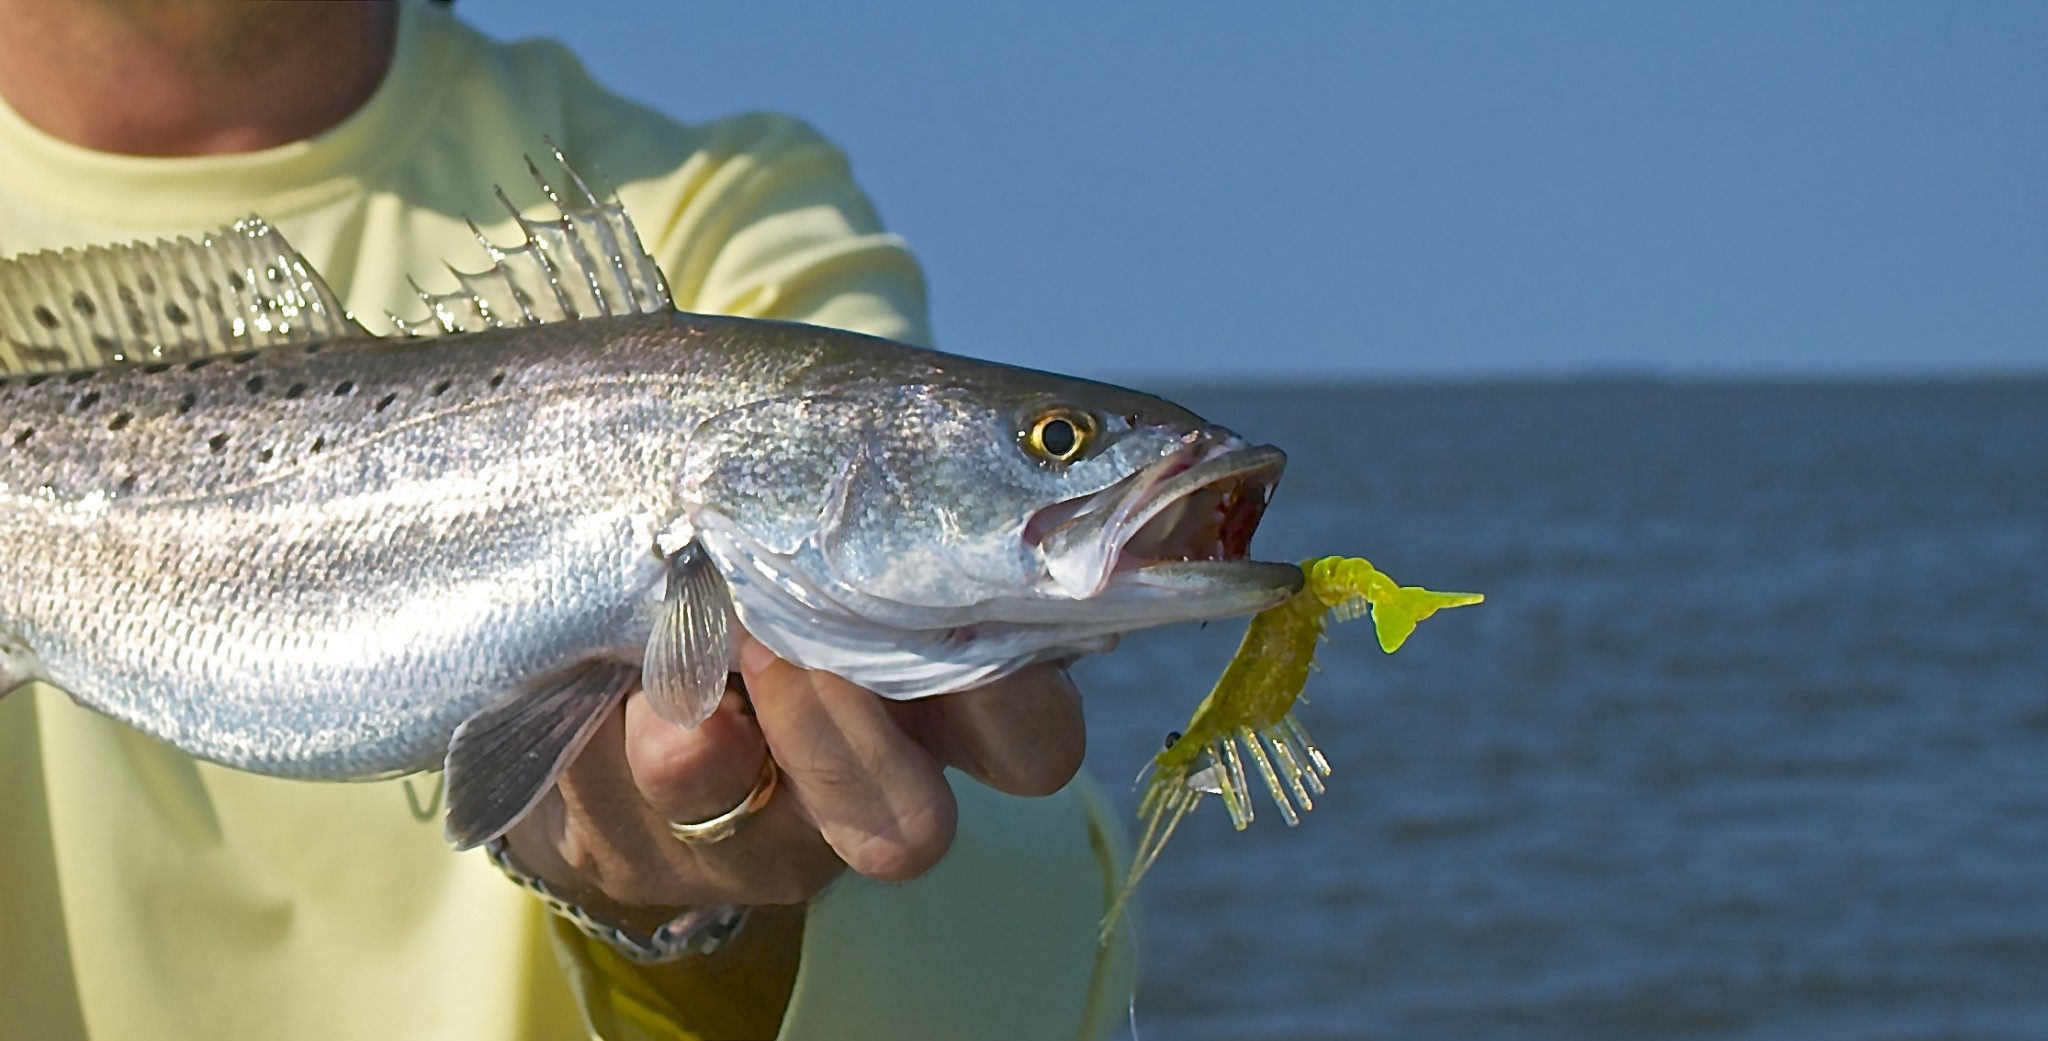 Speckled Sea Trout Fishing - Fly and Light Tackle Fishing for Sea